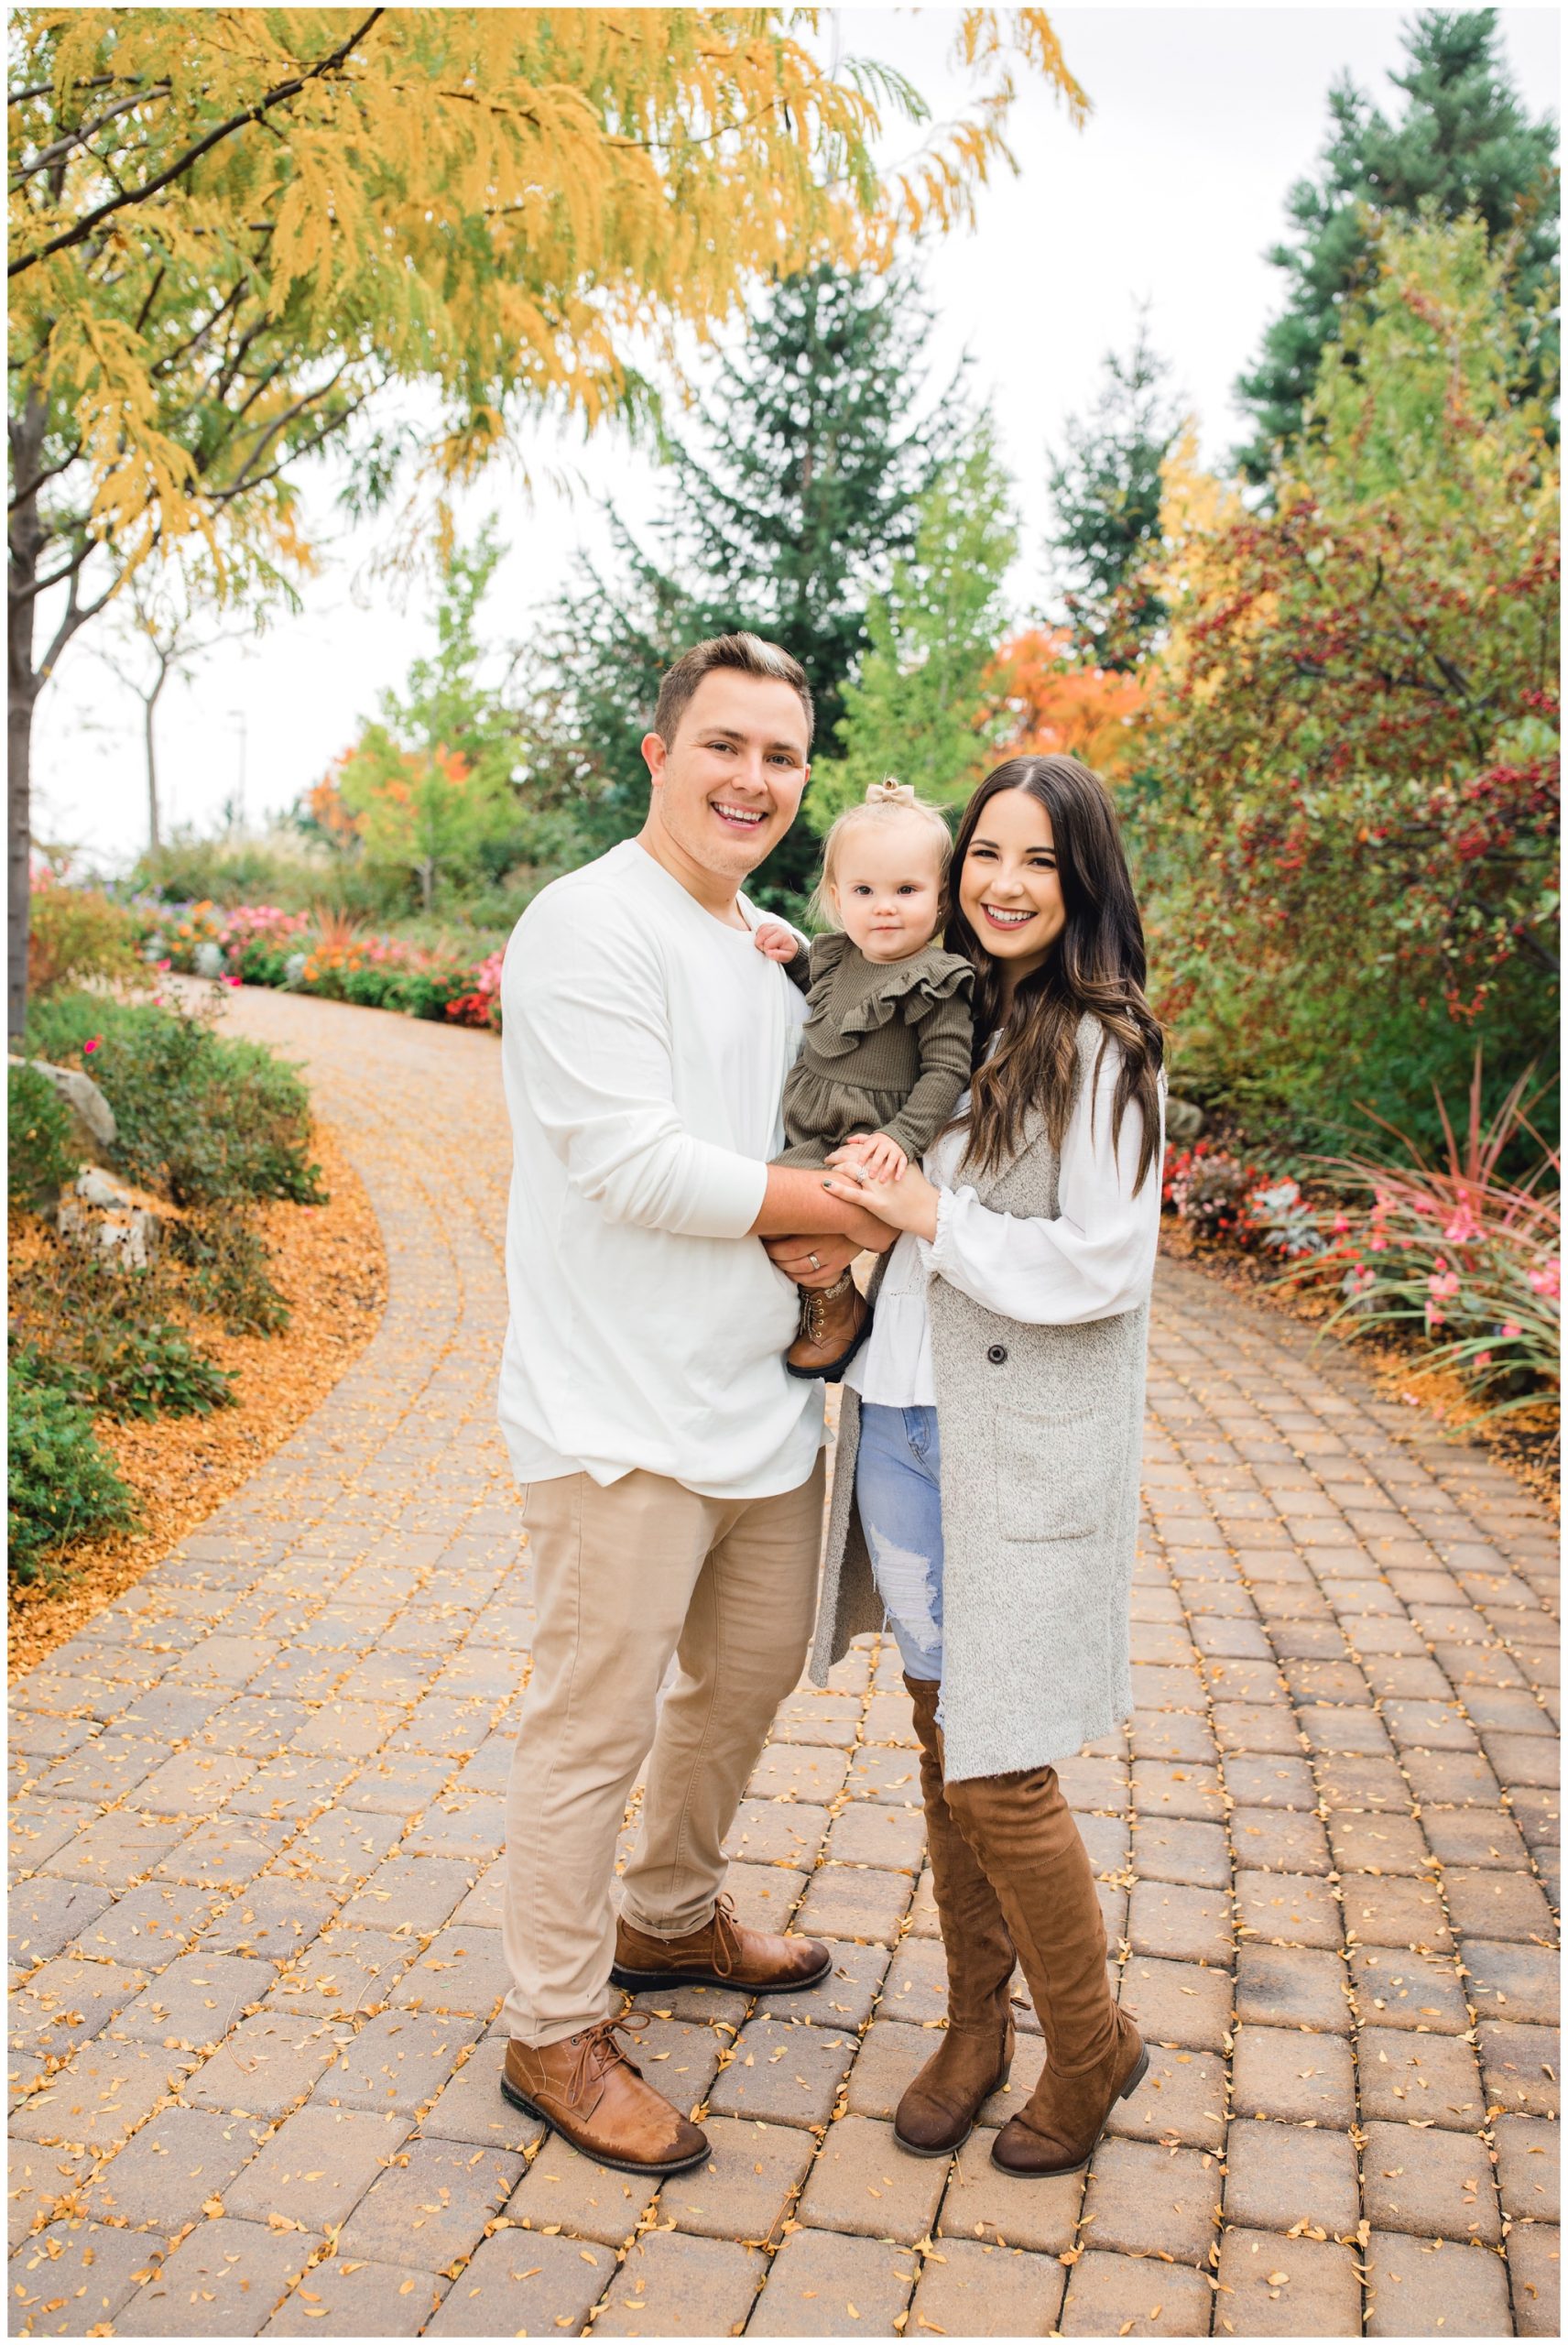 Best Fall outfits for your family session